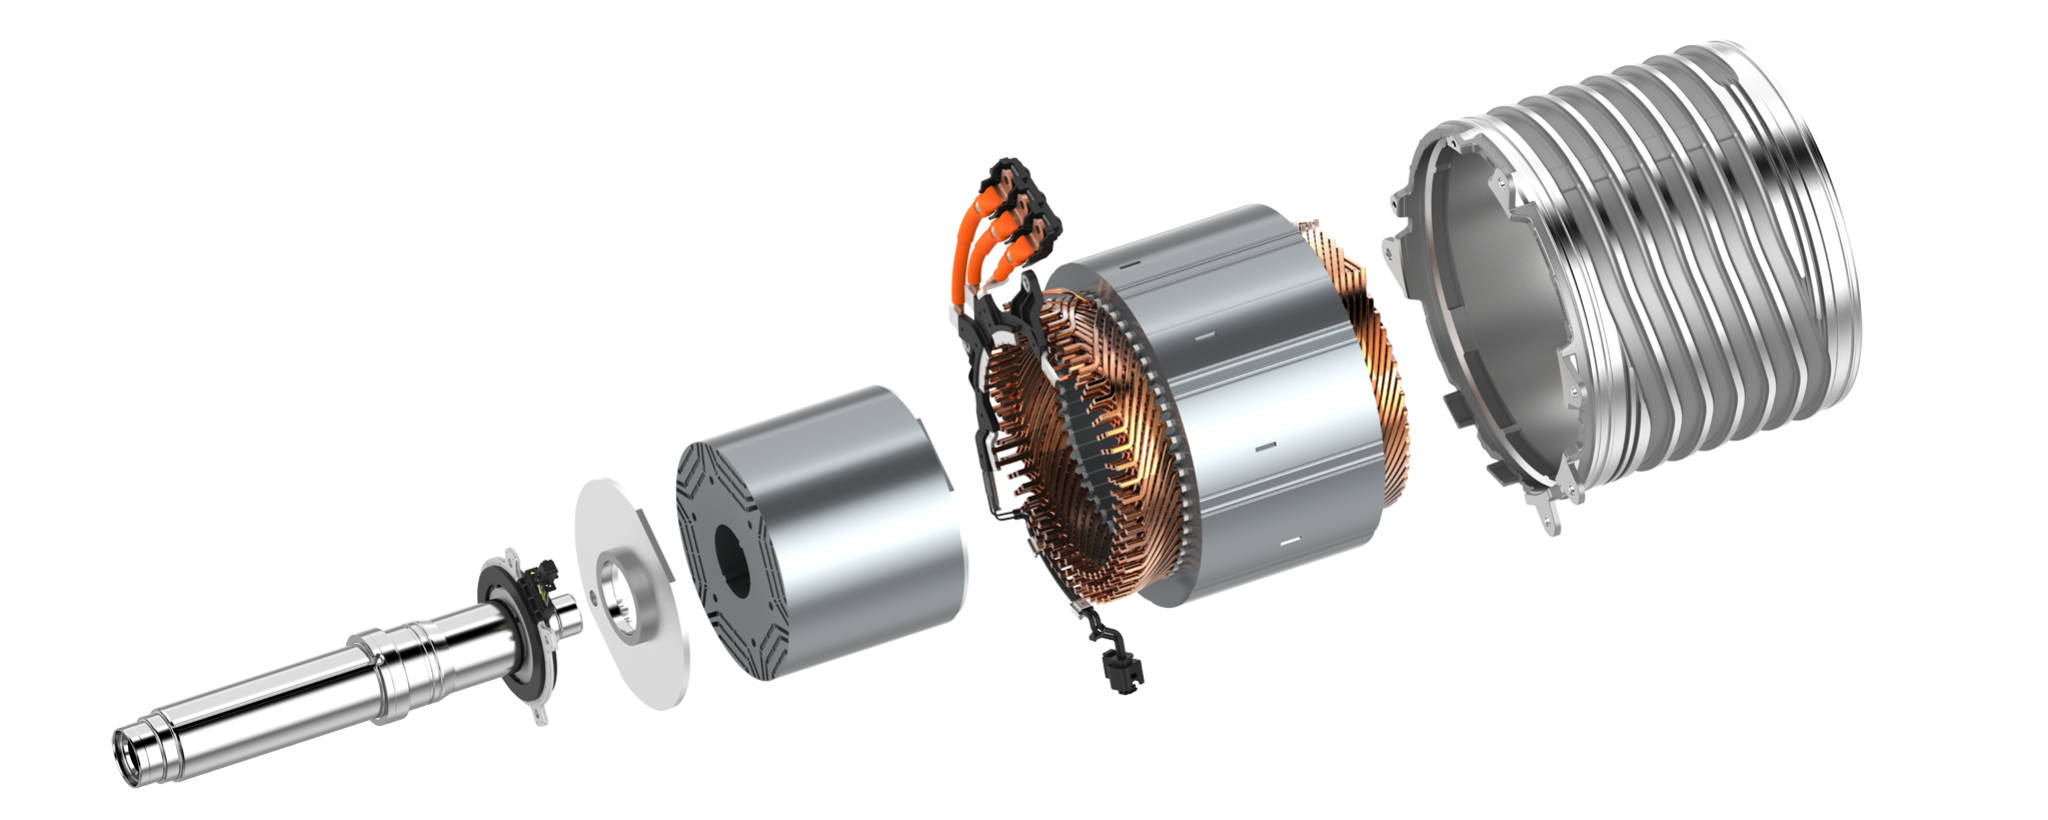 https://www.zf.com/master/media/magazine/2021/21_11/electric_motors/ZF_E-Motor_Hairpin_640px_5_2_2048px.png